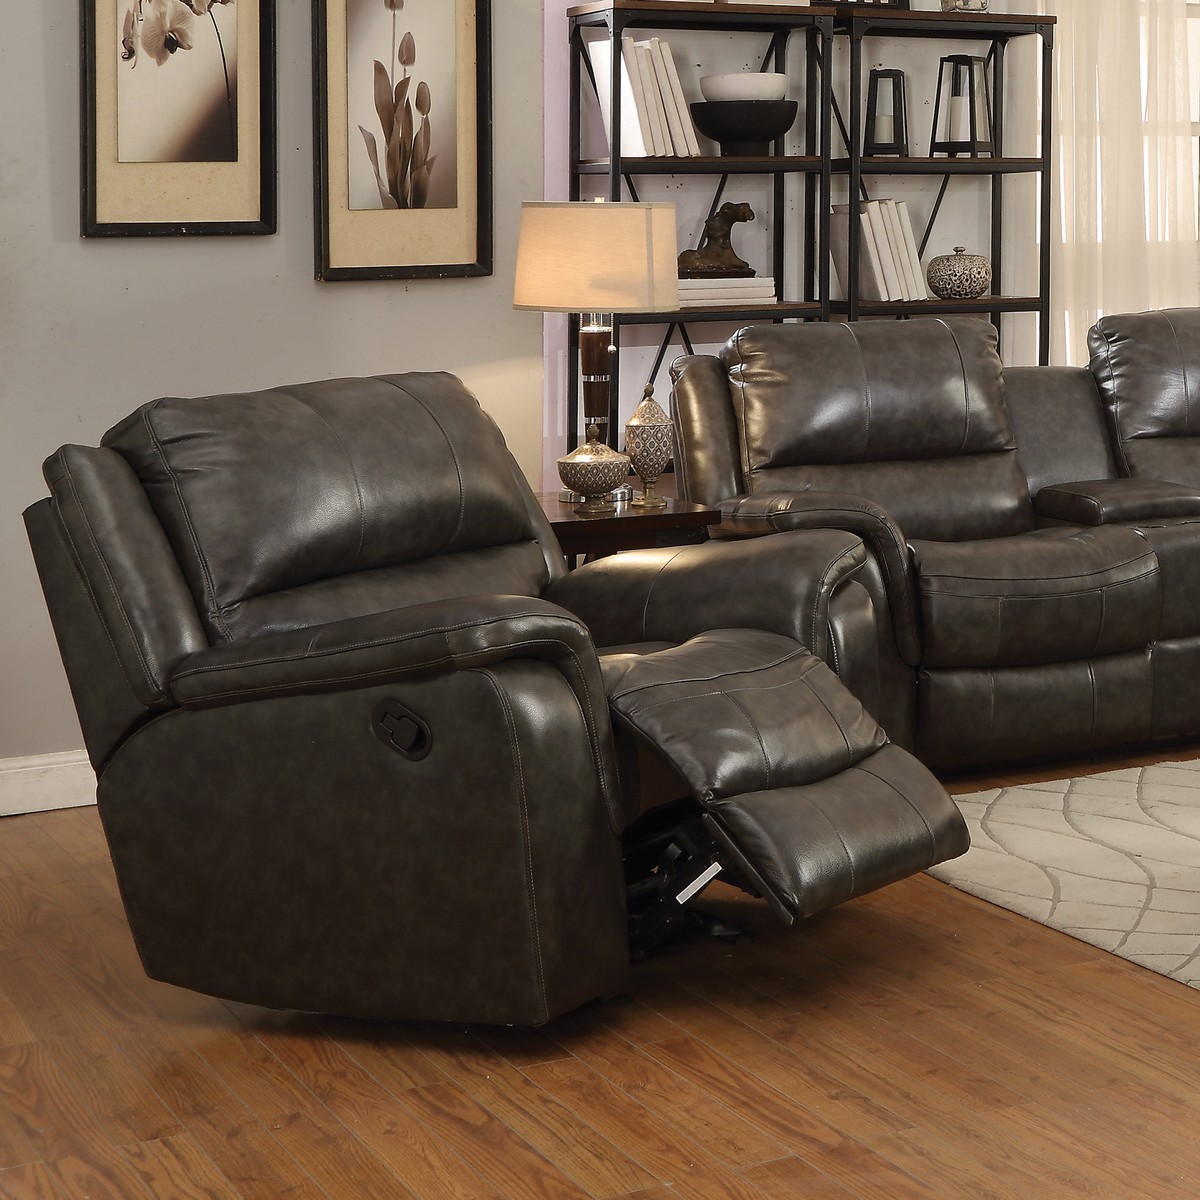 Coaster Wingfield Recliner - Two Tone Charcoal